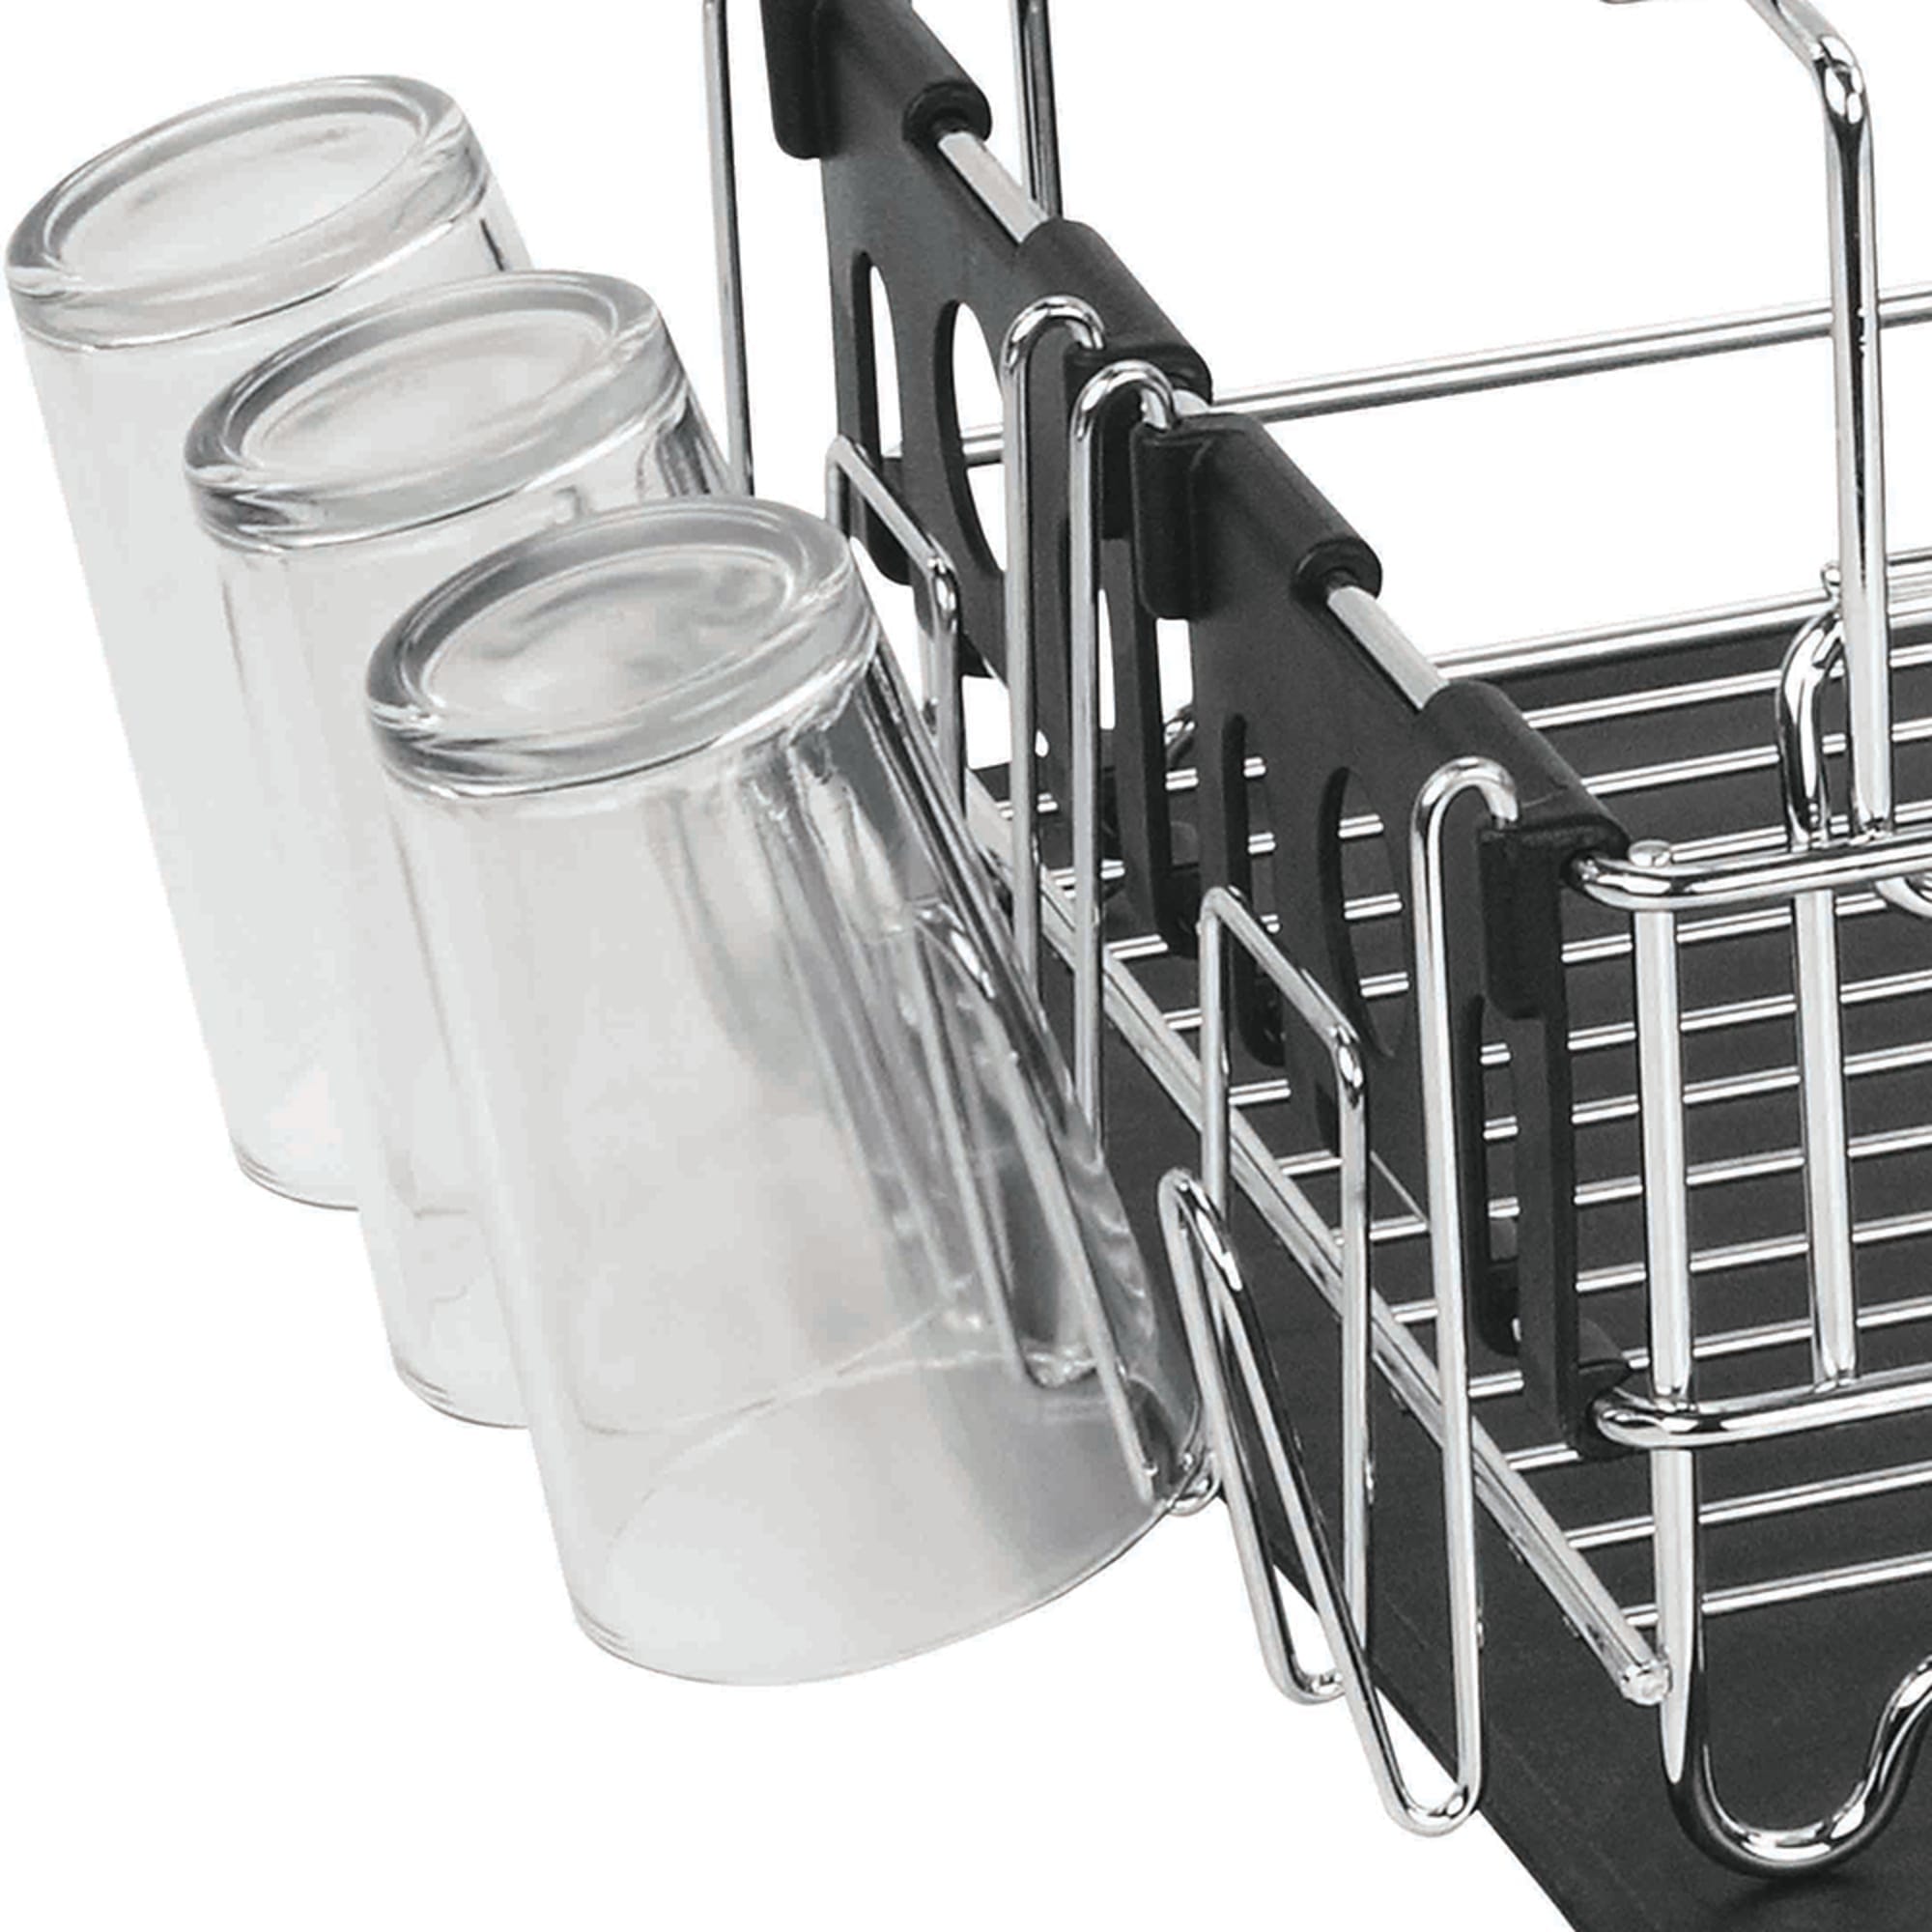 Home Basics 2-Tier Deluxe Dish Drainer $30.00 EACH, CASE PACK OF 6